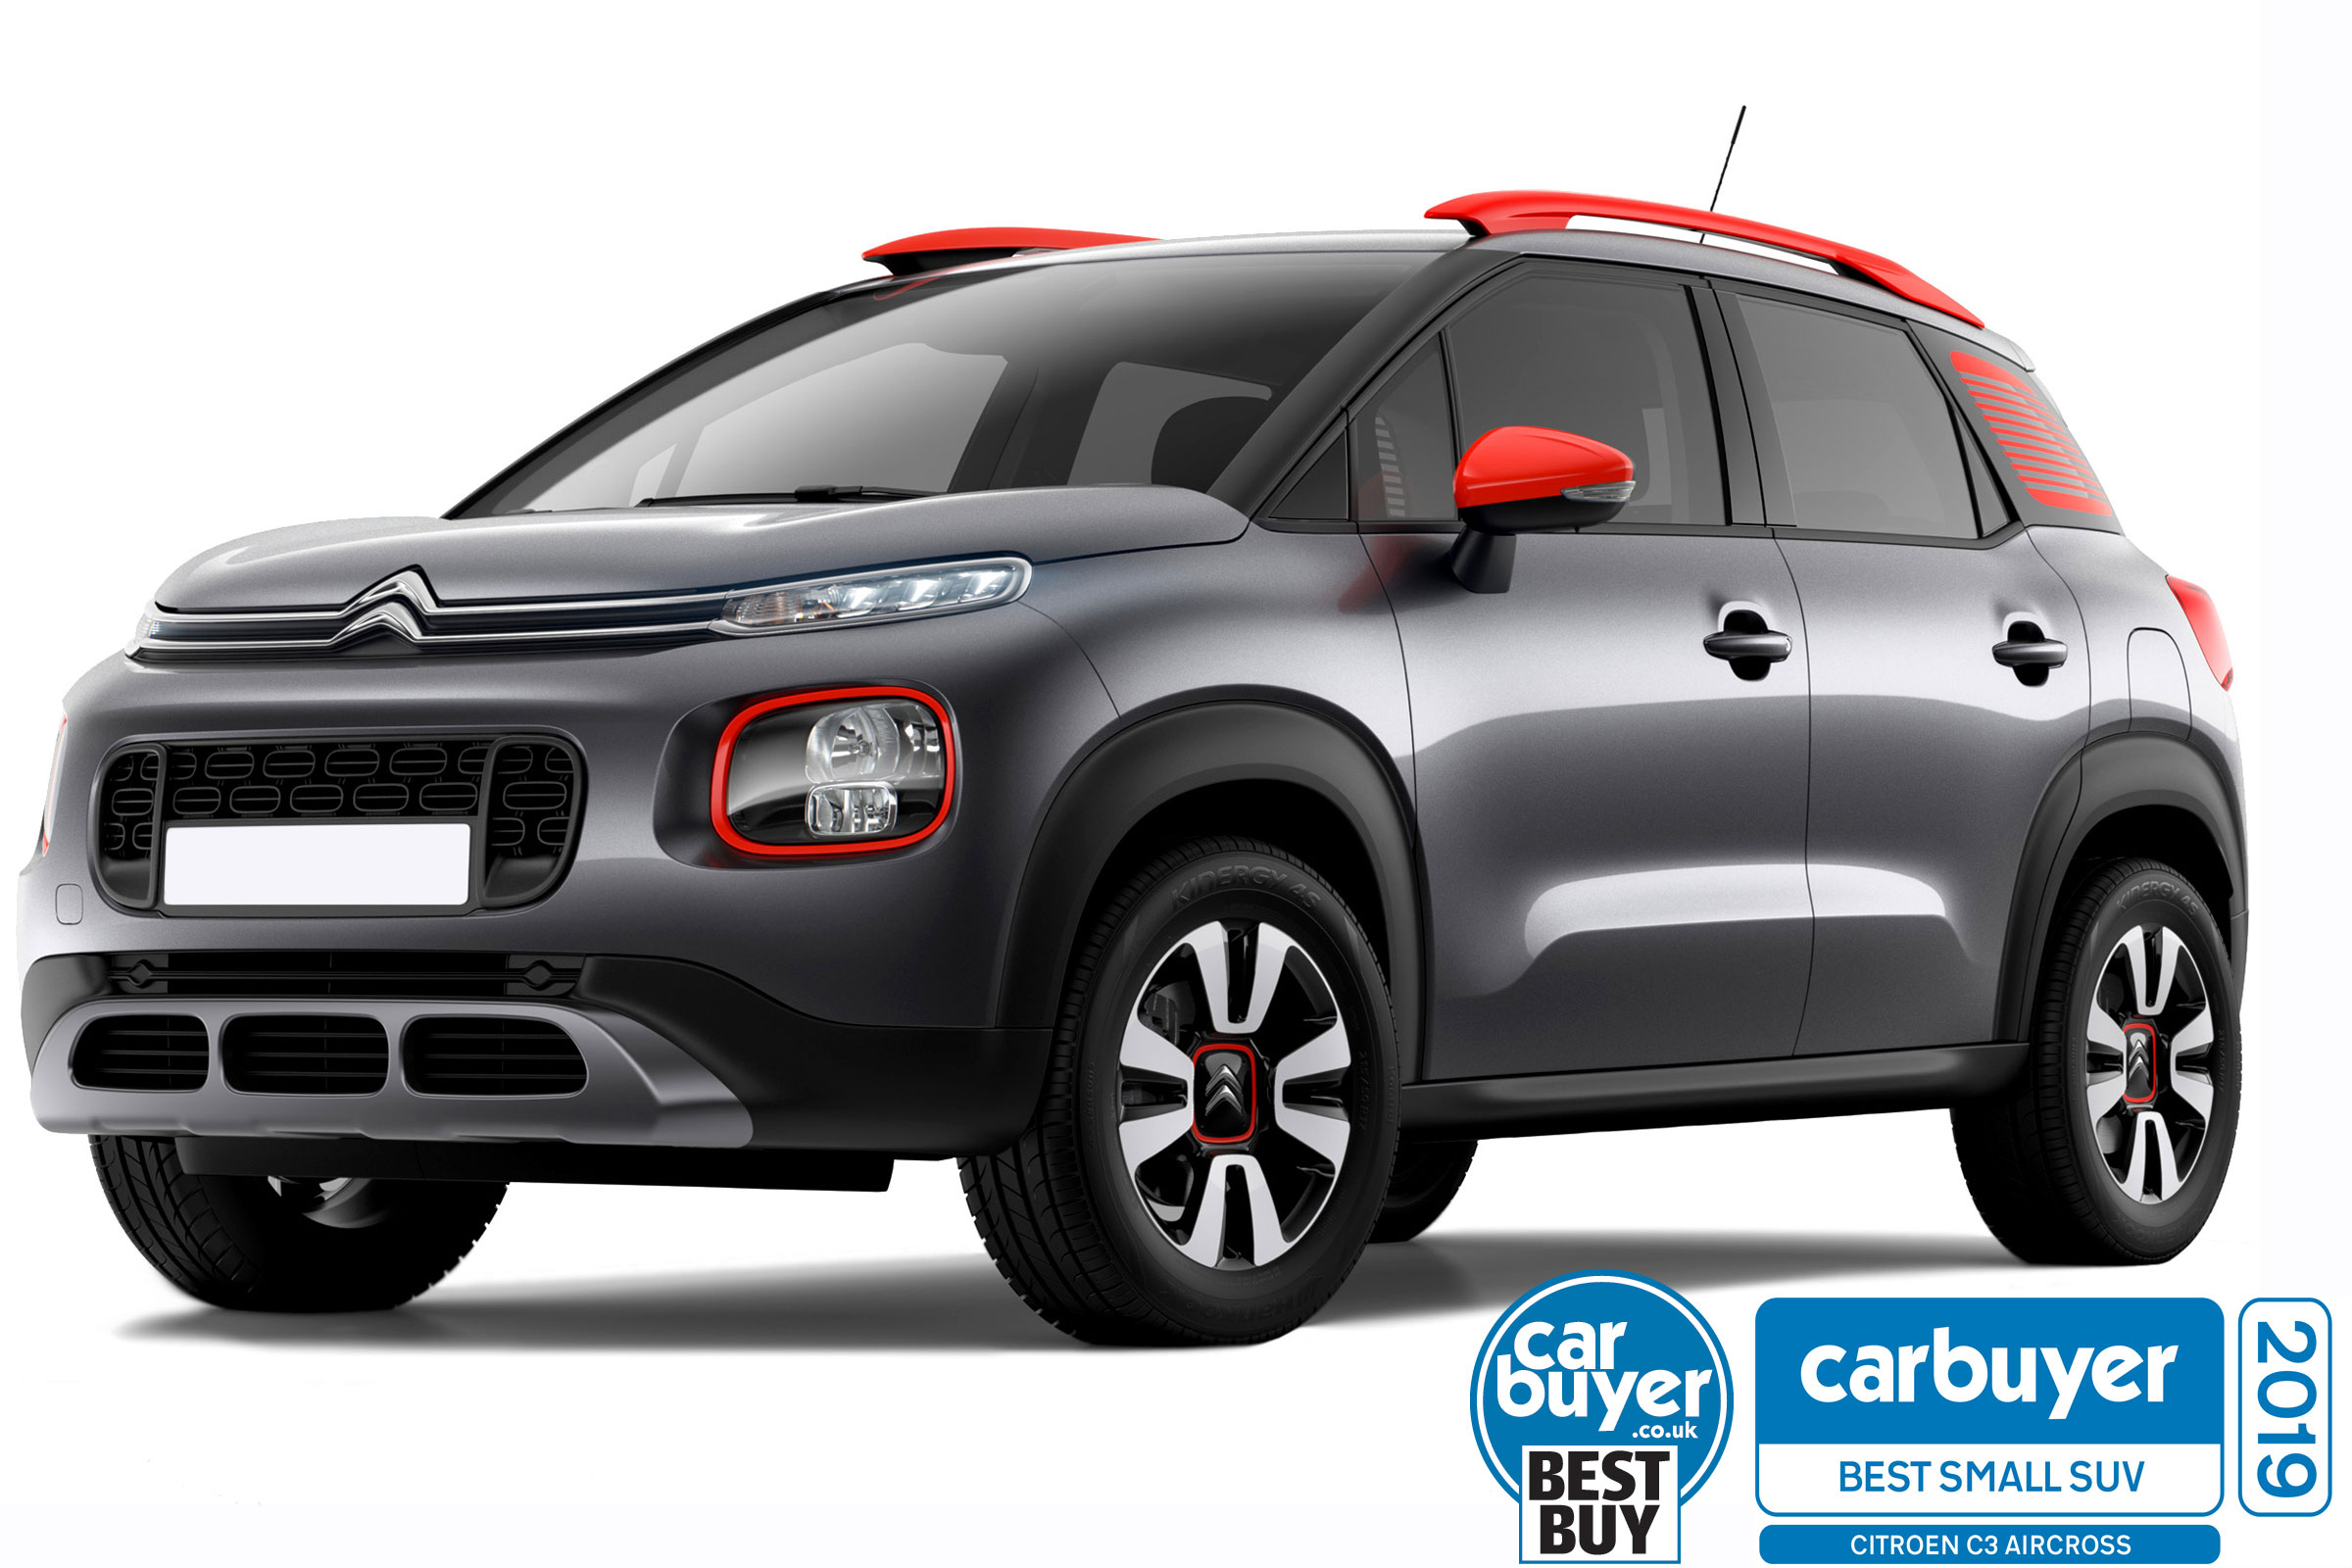 Citroen C3 Aircross Suv Reliability Safety Review Carbuyer